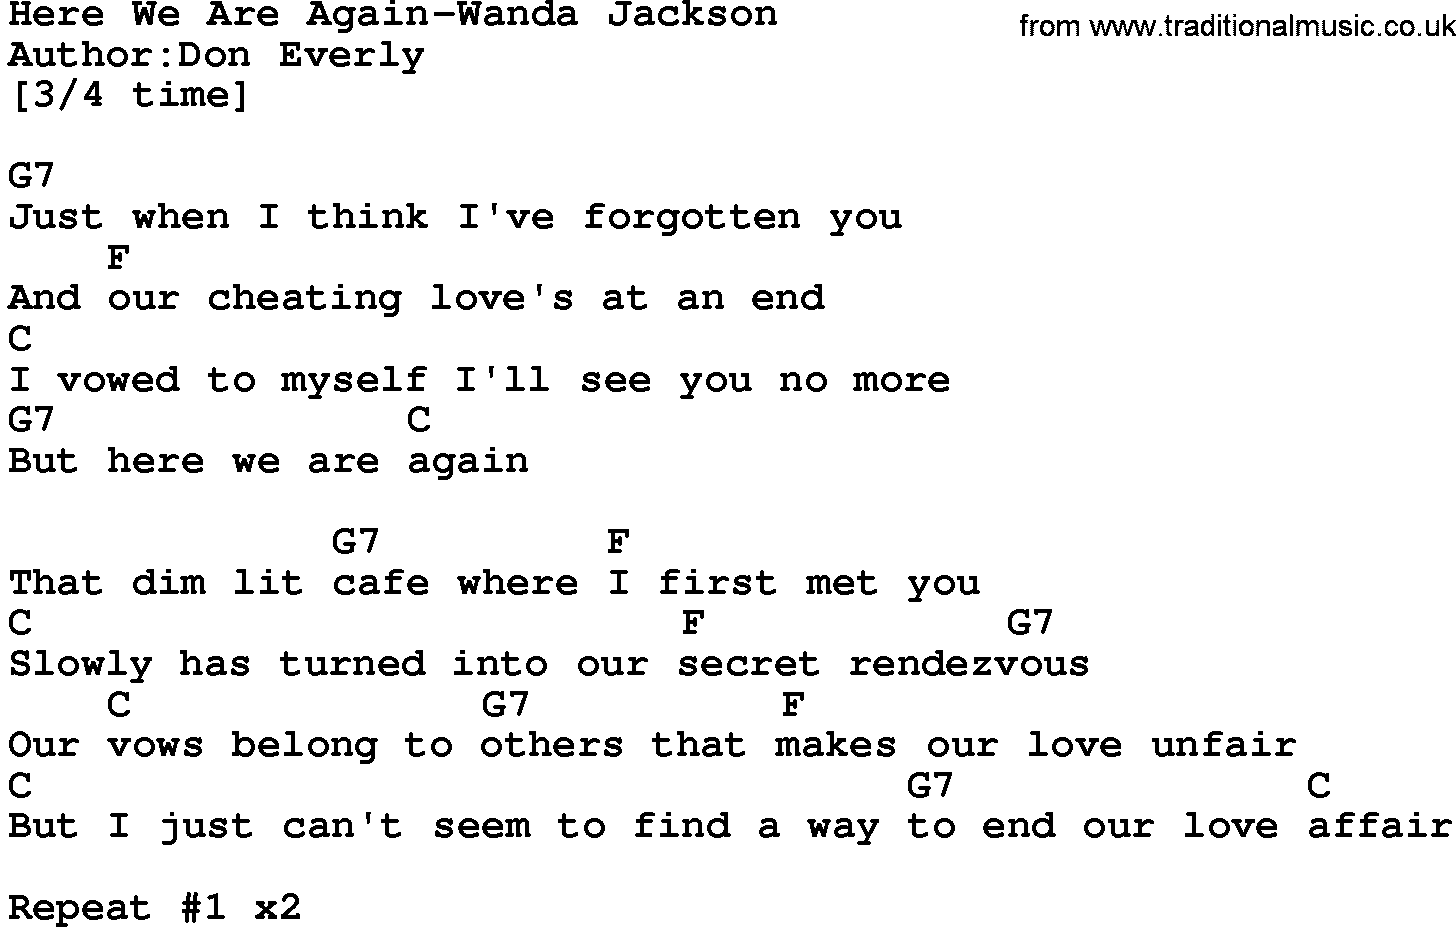 Country music song: Here We Are Again-Wanda Jackson lyrics and chords